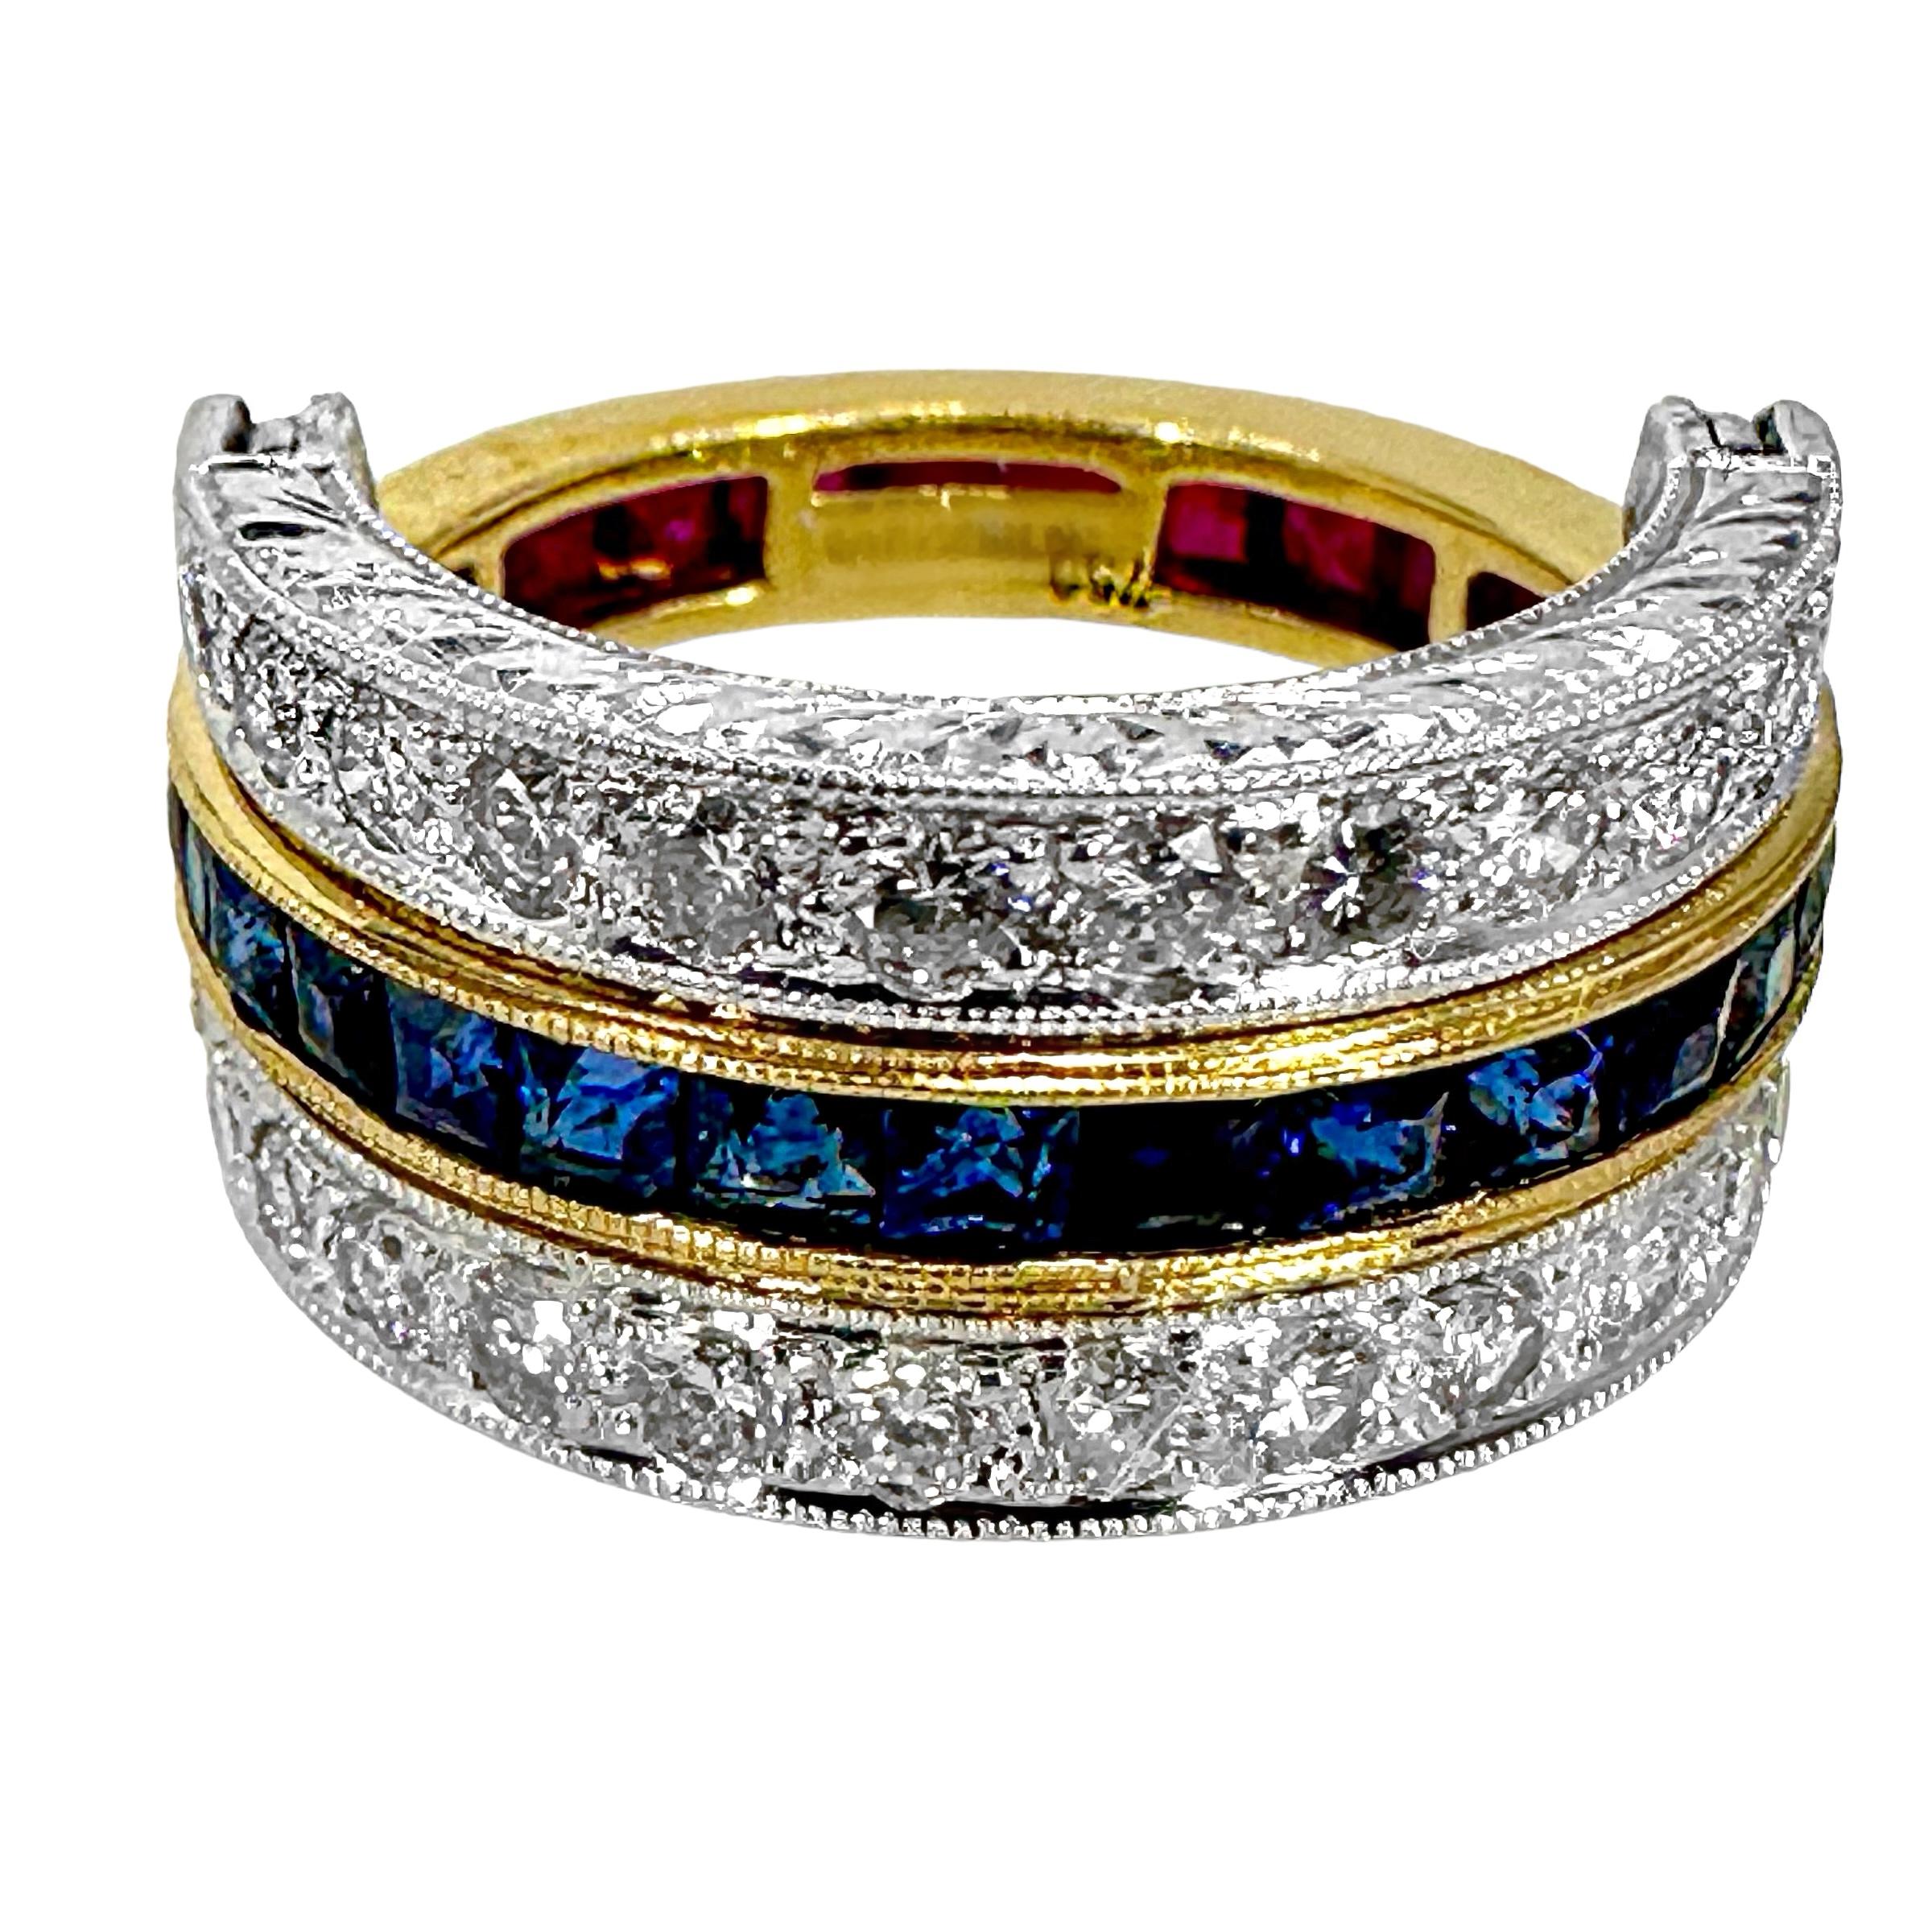 This expertly crafted ring gives the illusion of being an all around band
with the outer two rows of diamonds flanking the inner row of square cut
bright red rubies or square cut rich blue sapphires. This brilliant design allows the wearer the